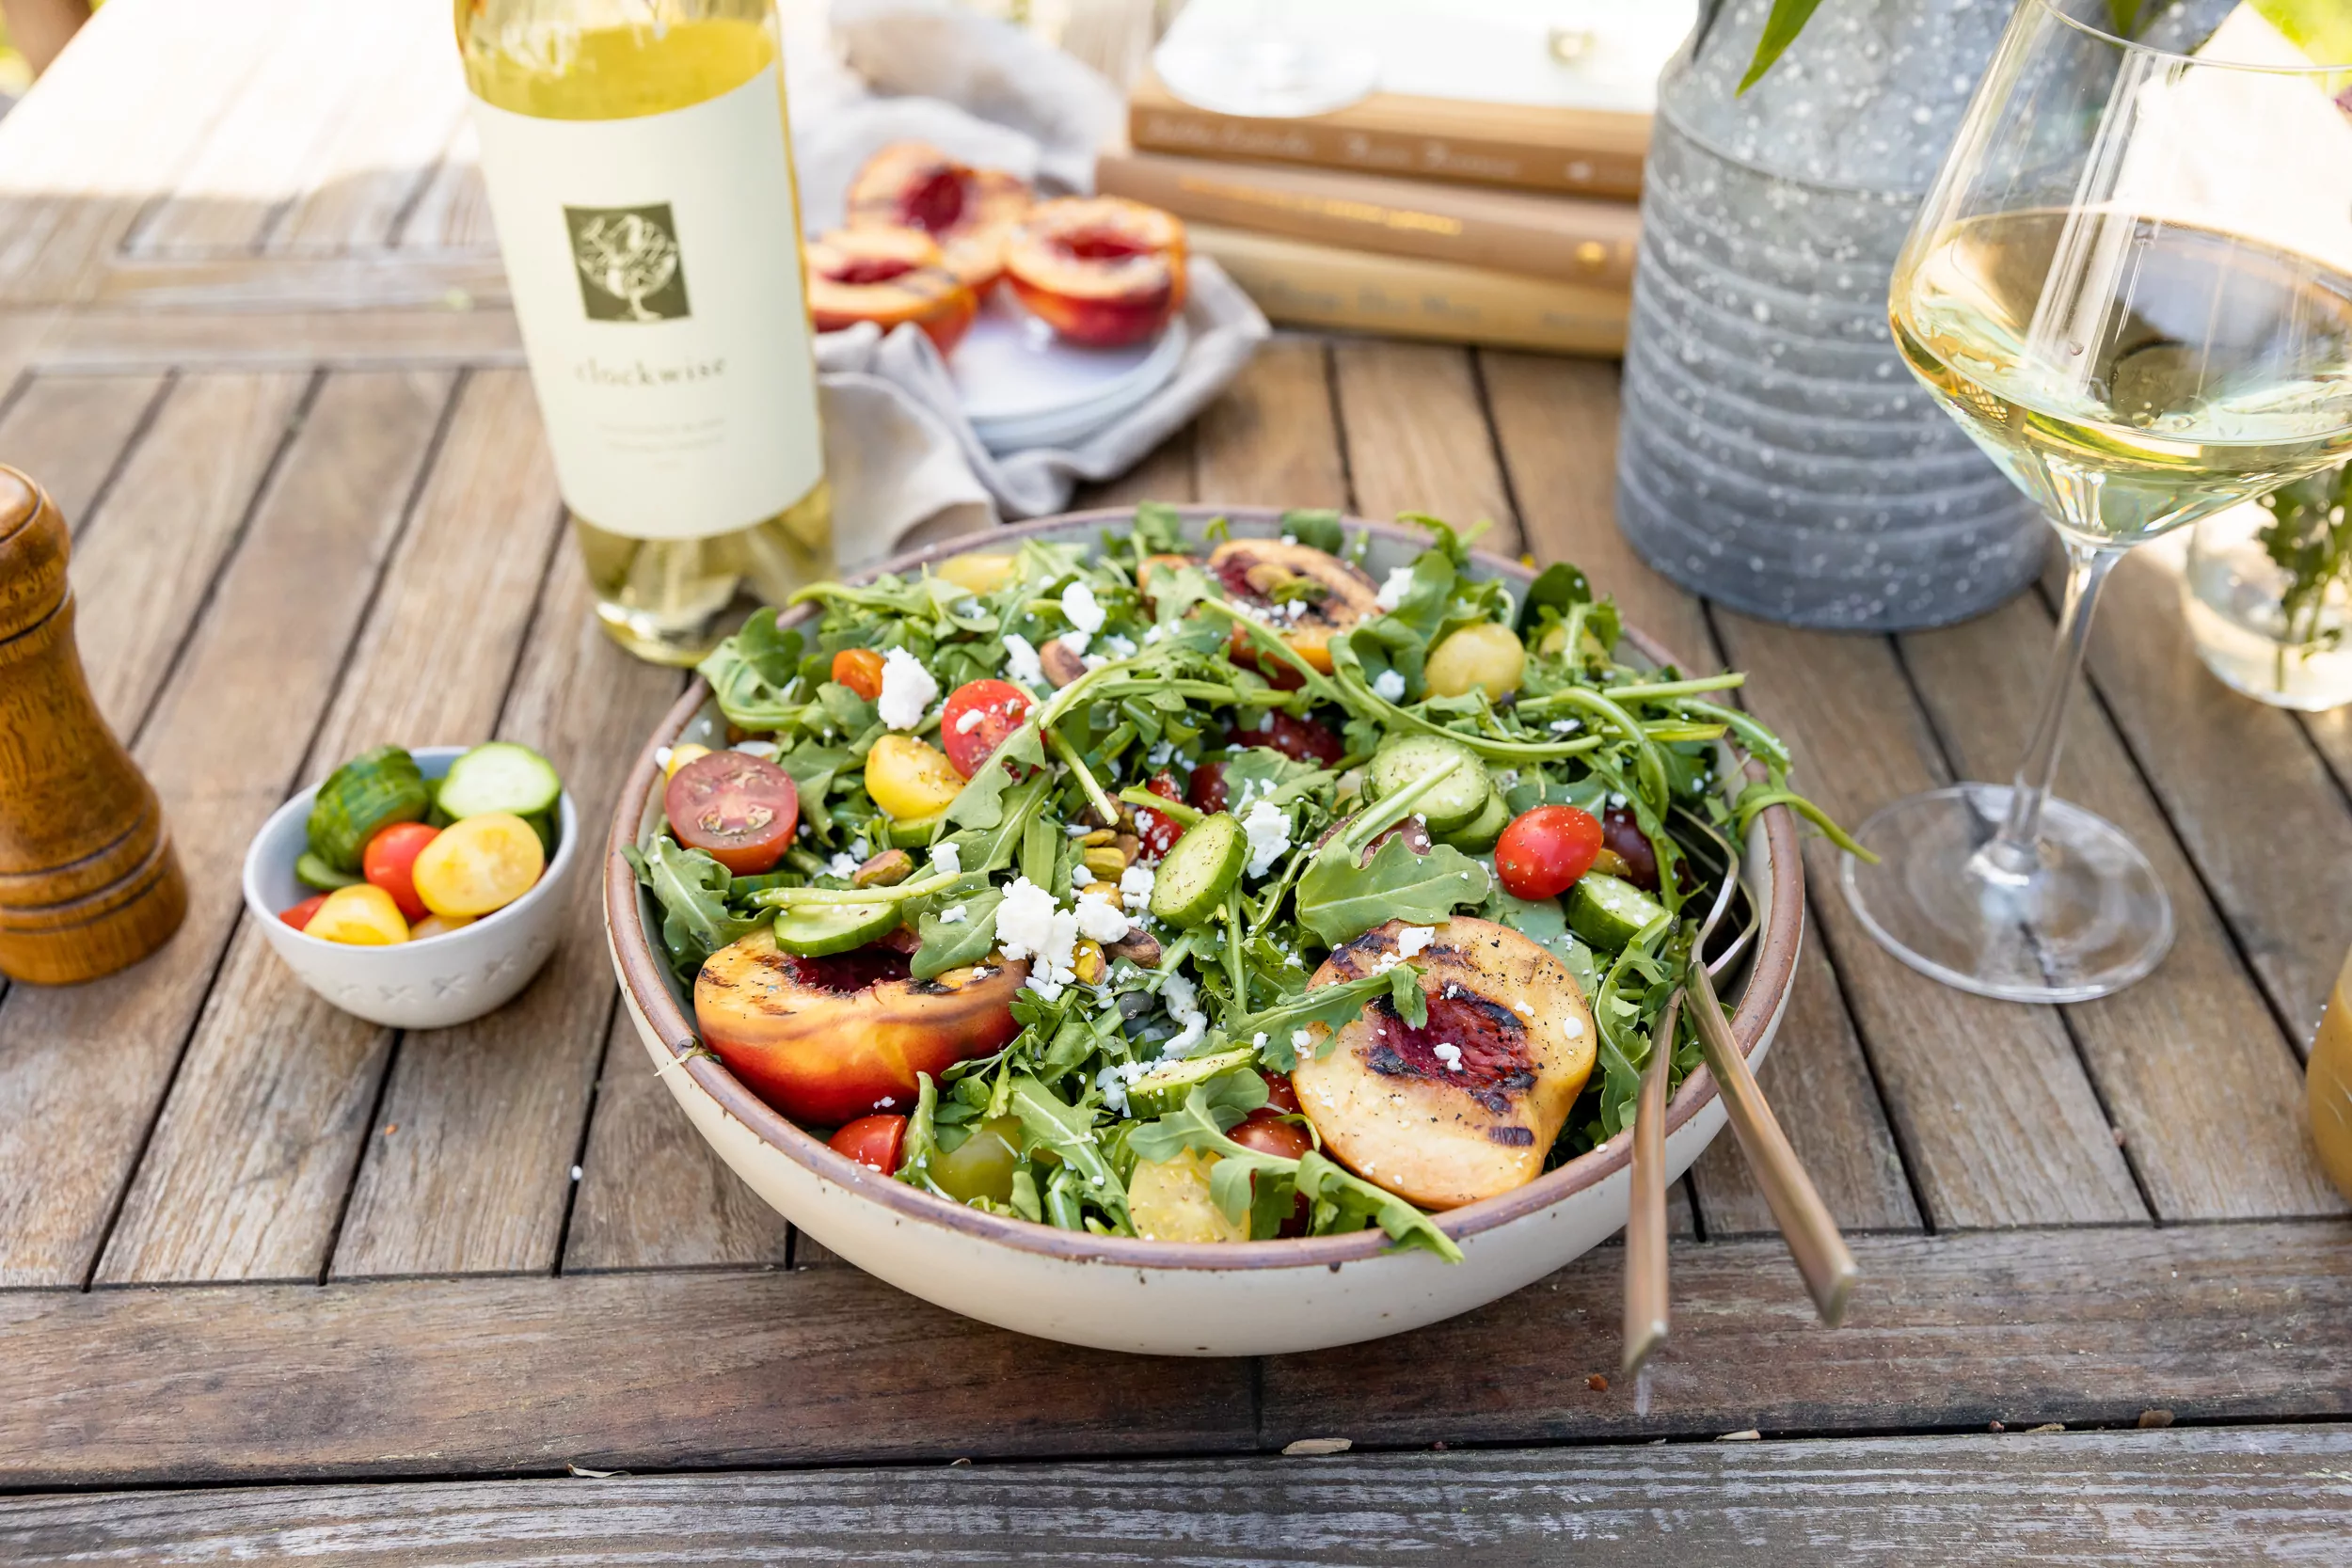 Spring Salad with Grilled Nectarines & Honey Dijon Dressing intro image